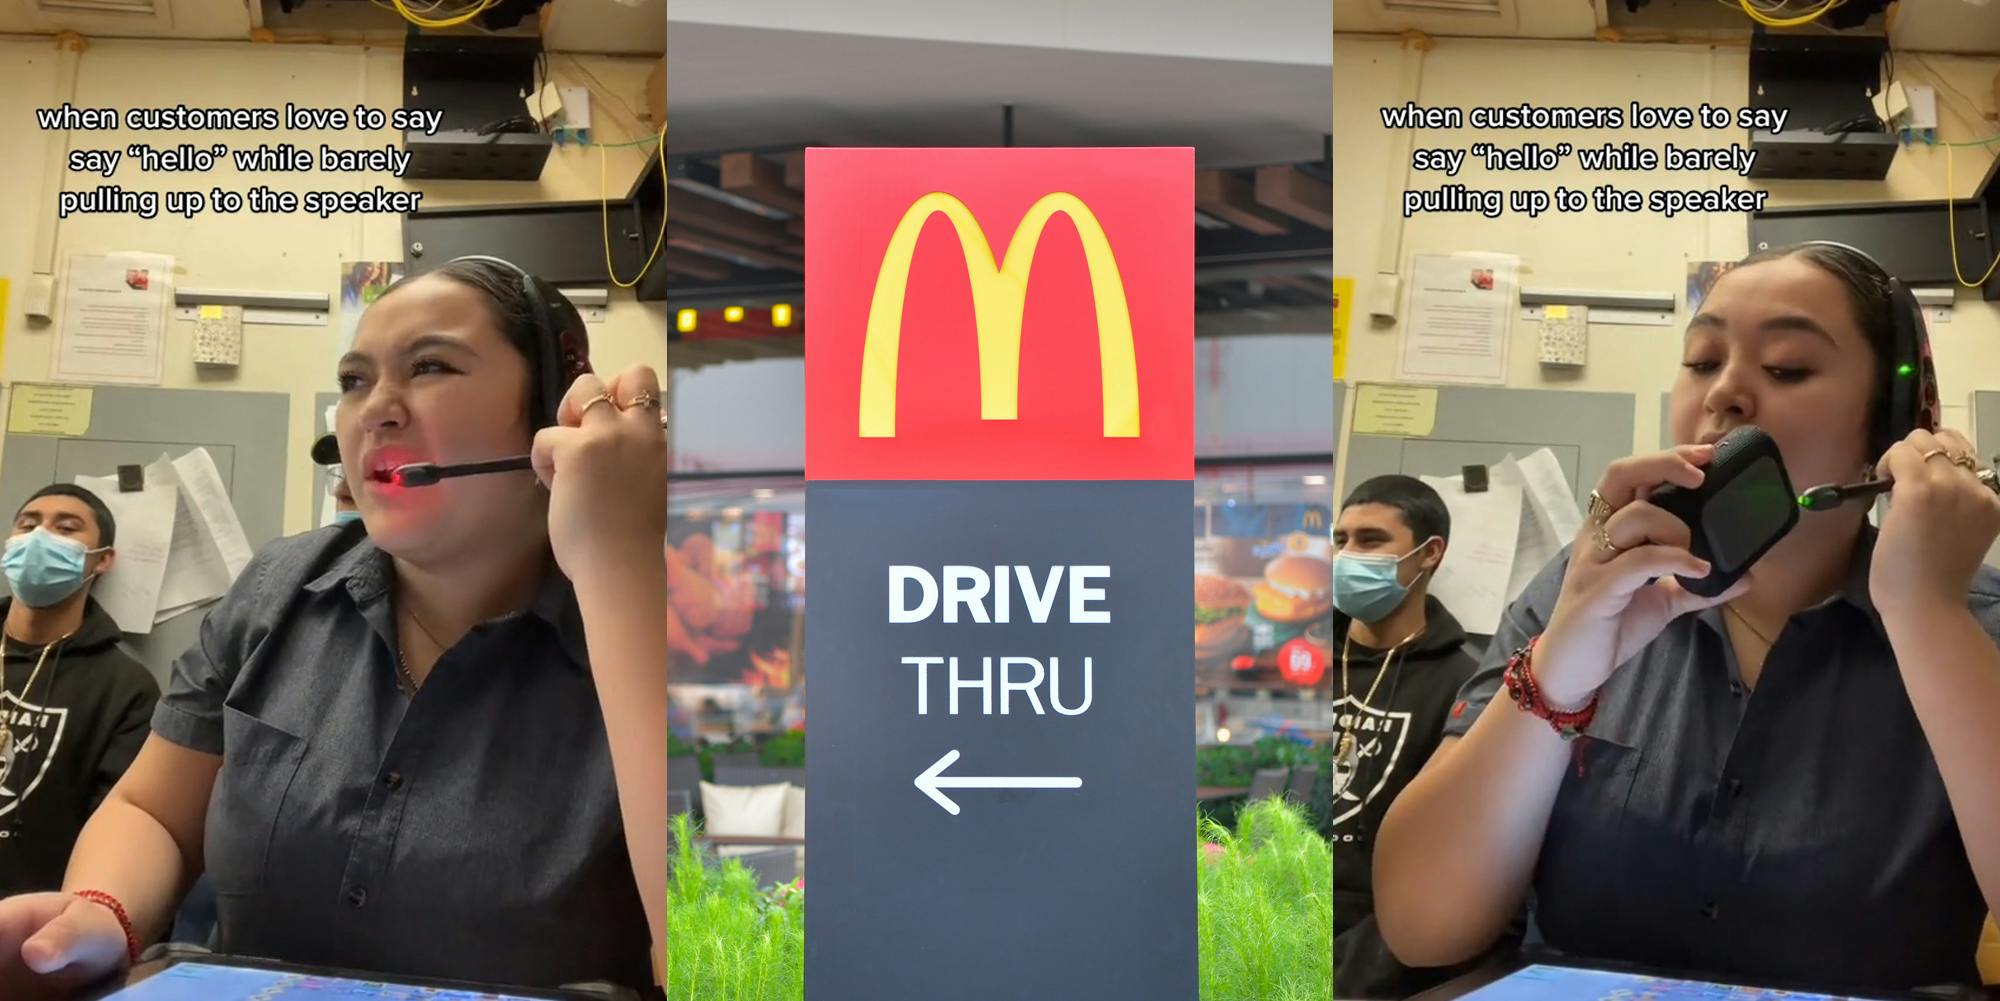 McDonald's worker speaking with headset on with caption "when customers love to say "hello" while barely pulling up to the speaker" (l) McDonald's drive thru sign in front of building (c) McDonald's worker speaking with headset on and speaker up to microphone with caption "when customers love to say "hello" while barely pulling up to the speaker" (r)